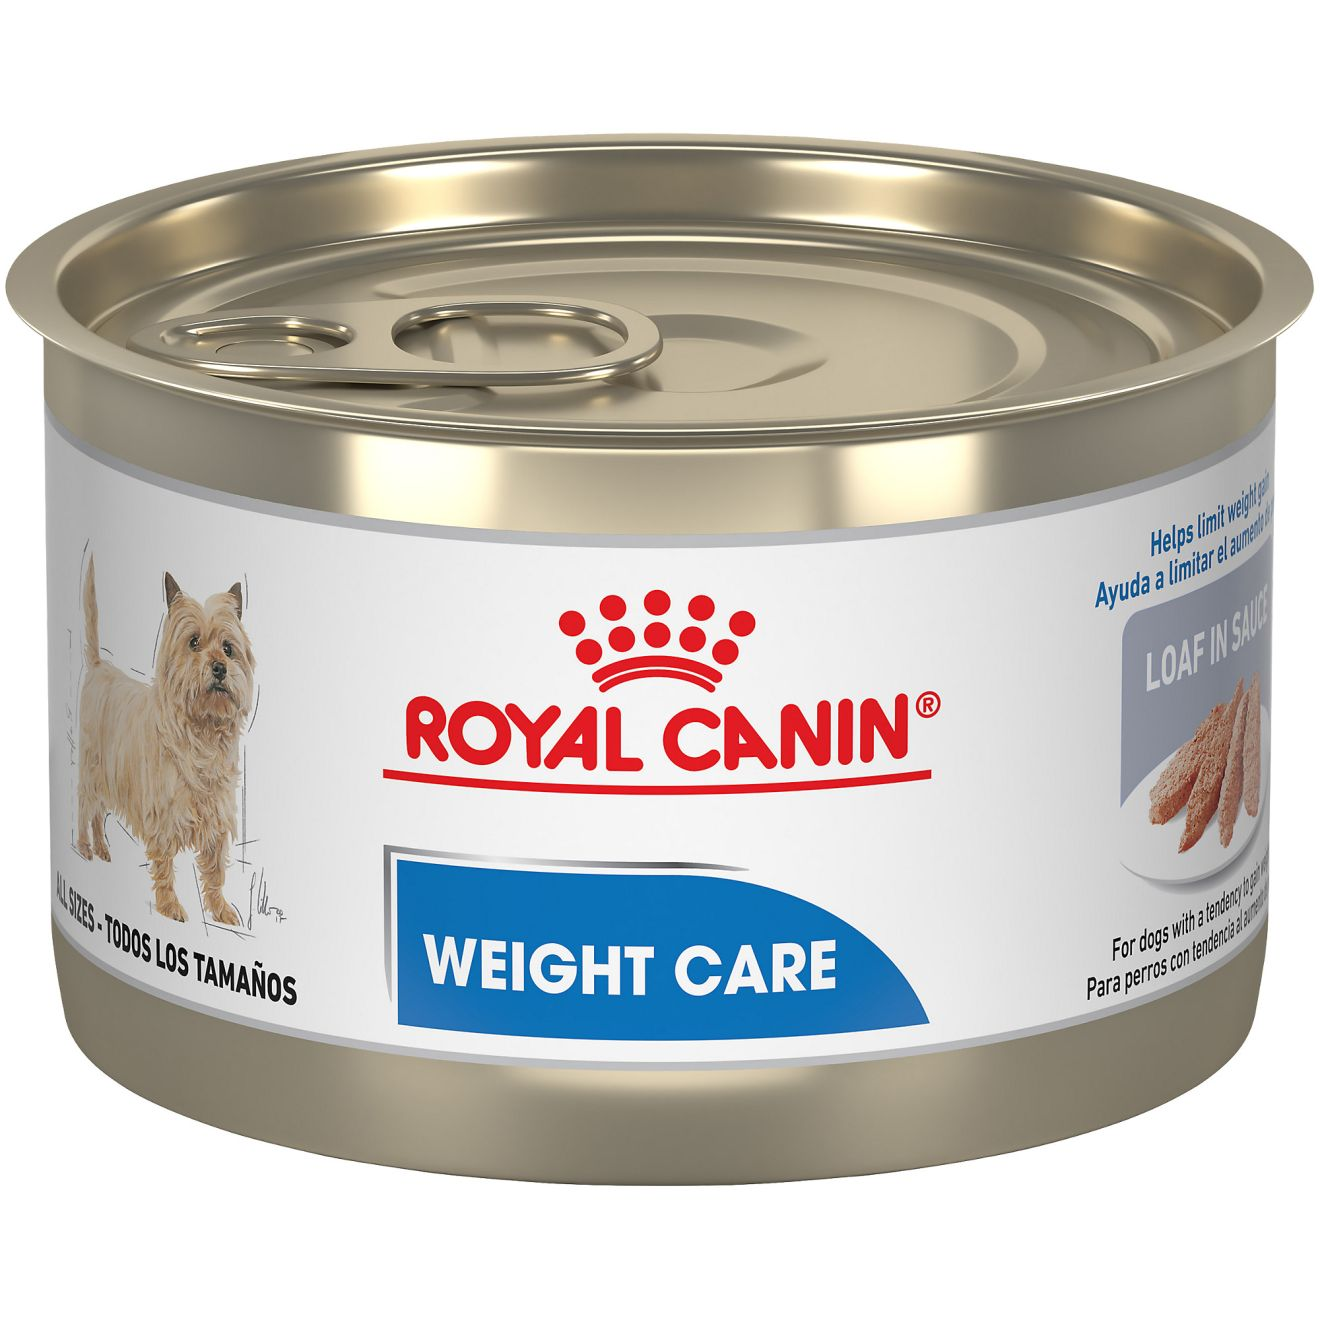 Weight Care Loaf in Sauce Canned Dog Food | Royal Canin US